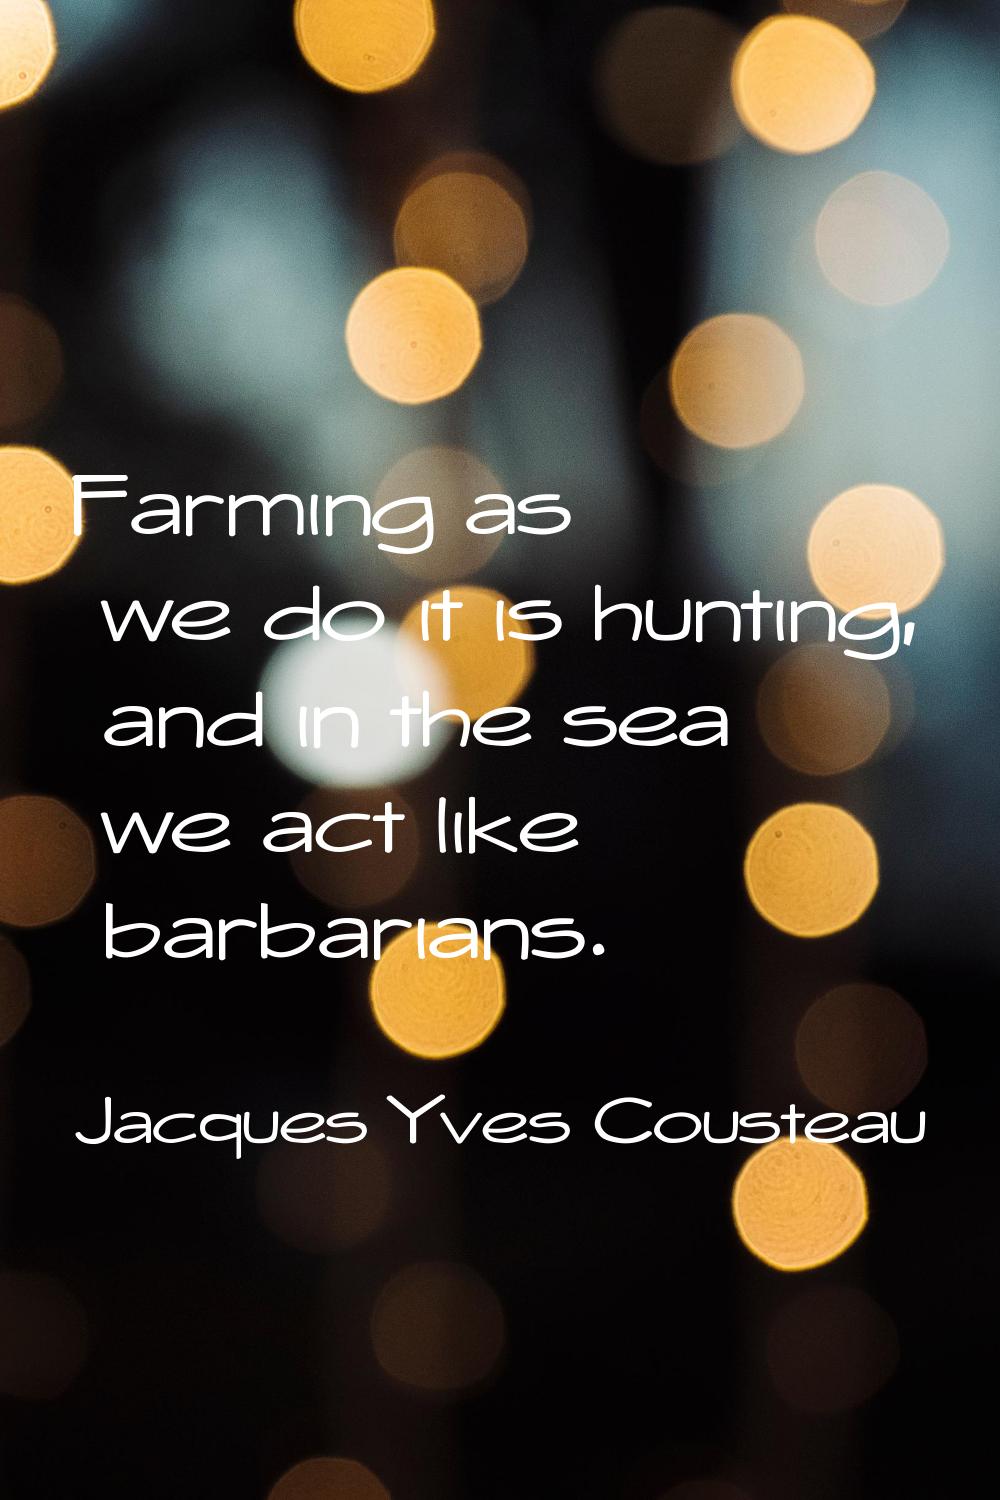 Farming as we do it is hunting, and in the sea we act like barbarians.